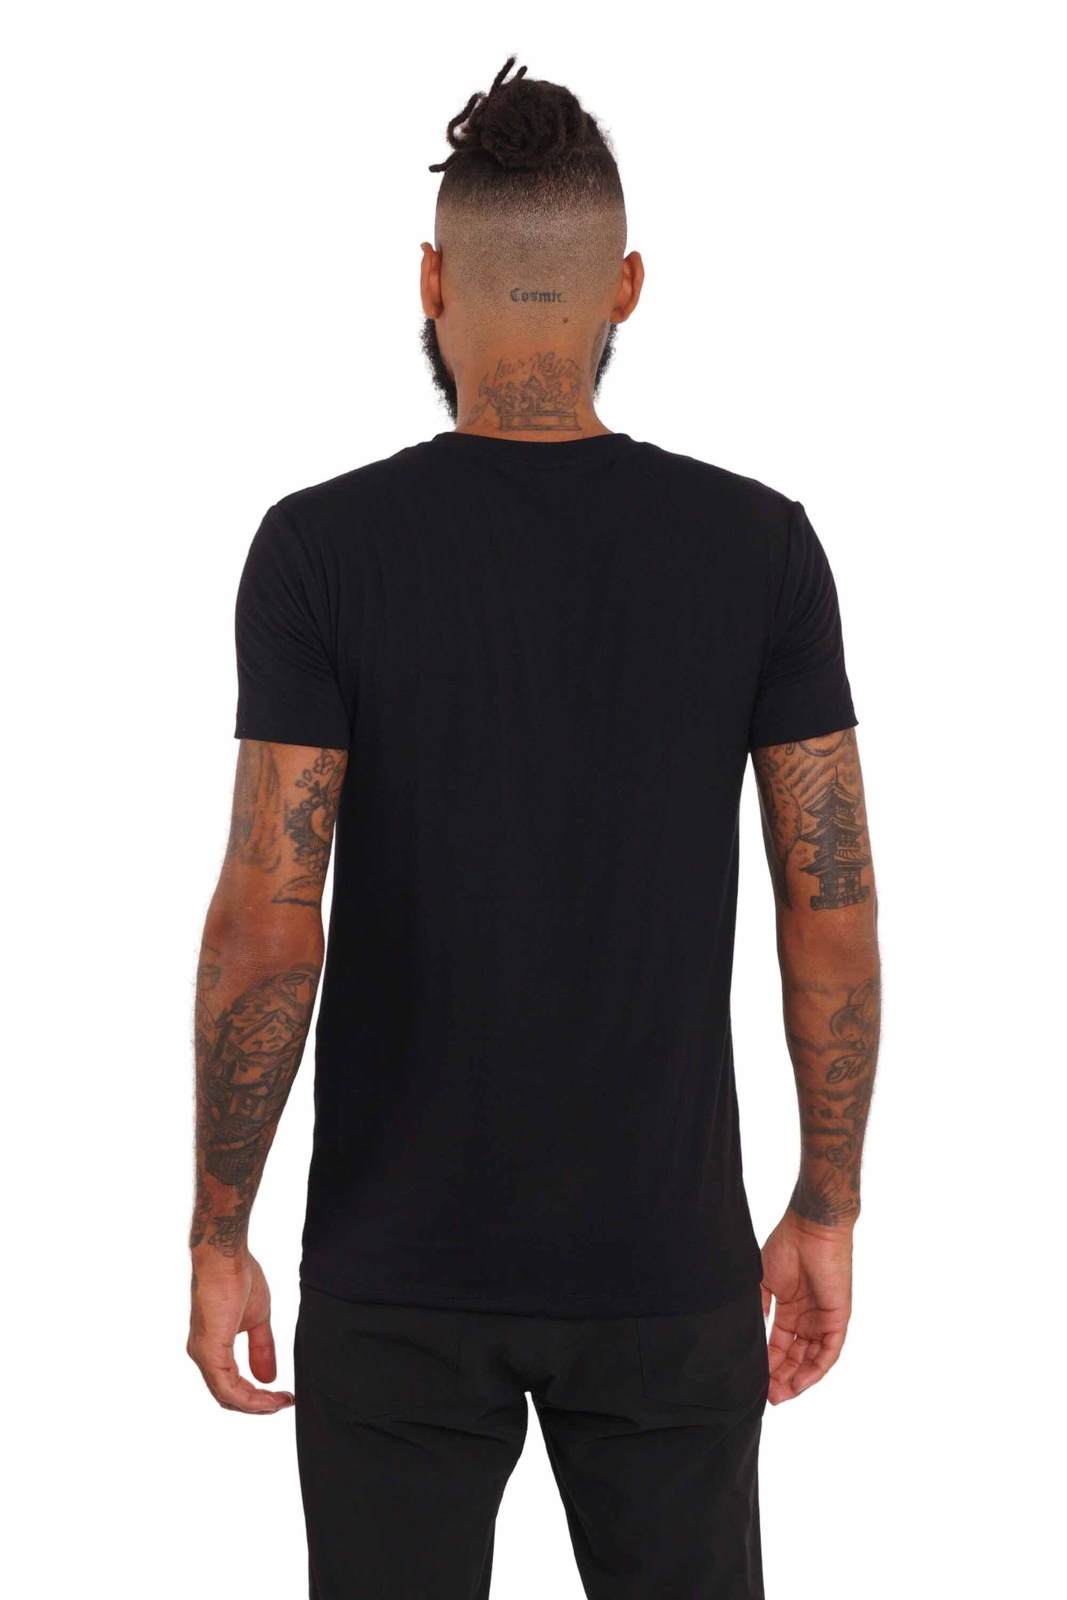 Crew Neck Mens Black Muscle Fit T Shirt From Ekoluxe